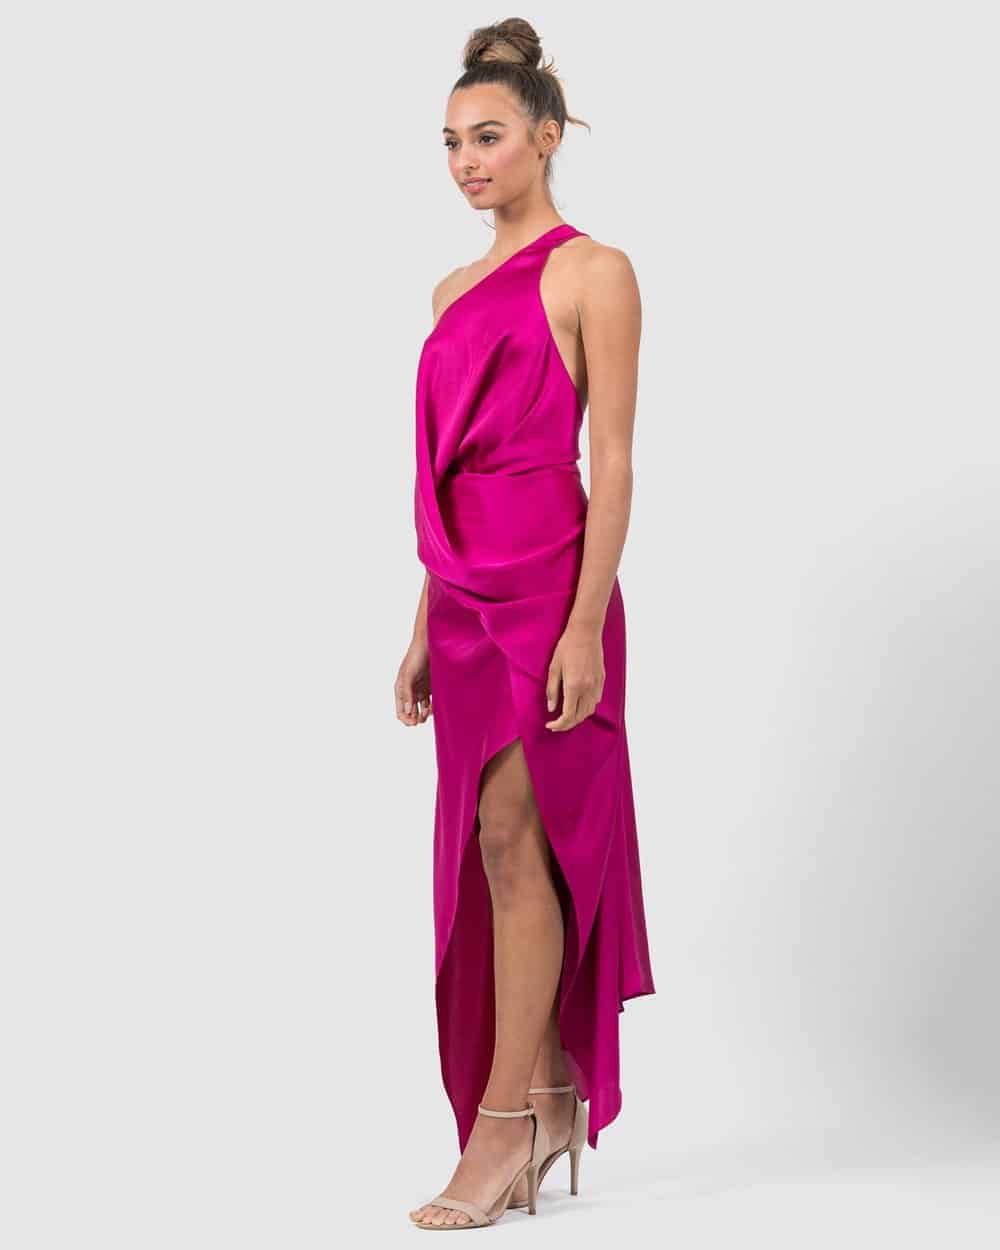 One Fell Swoop Philly Dress - Cardinal Pink - Get Dressed Hire